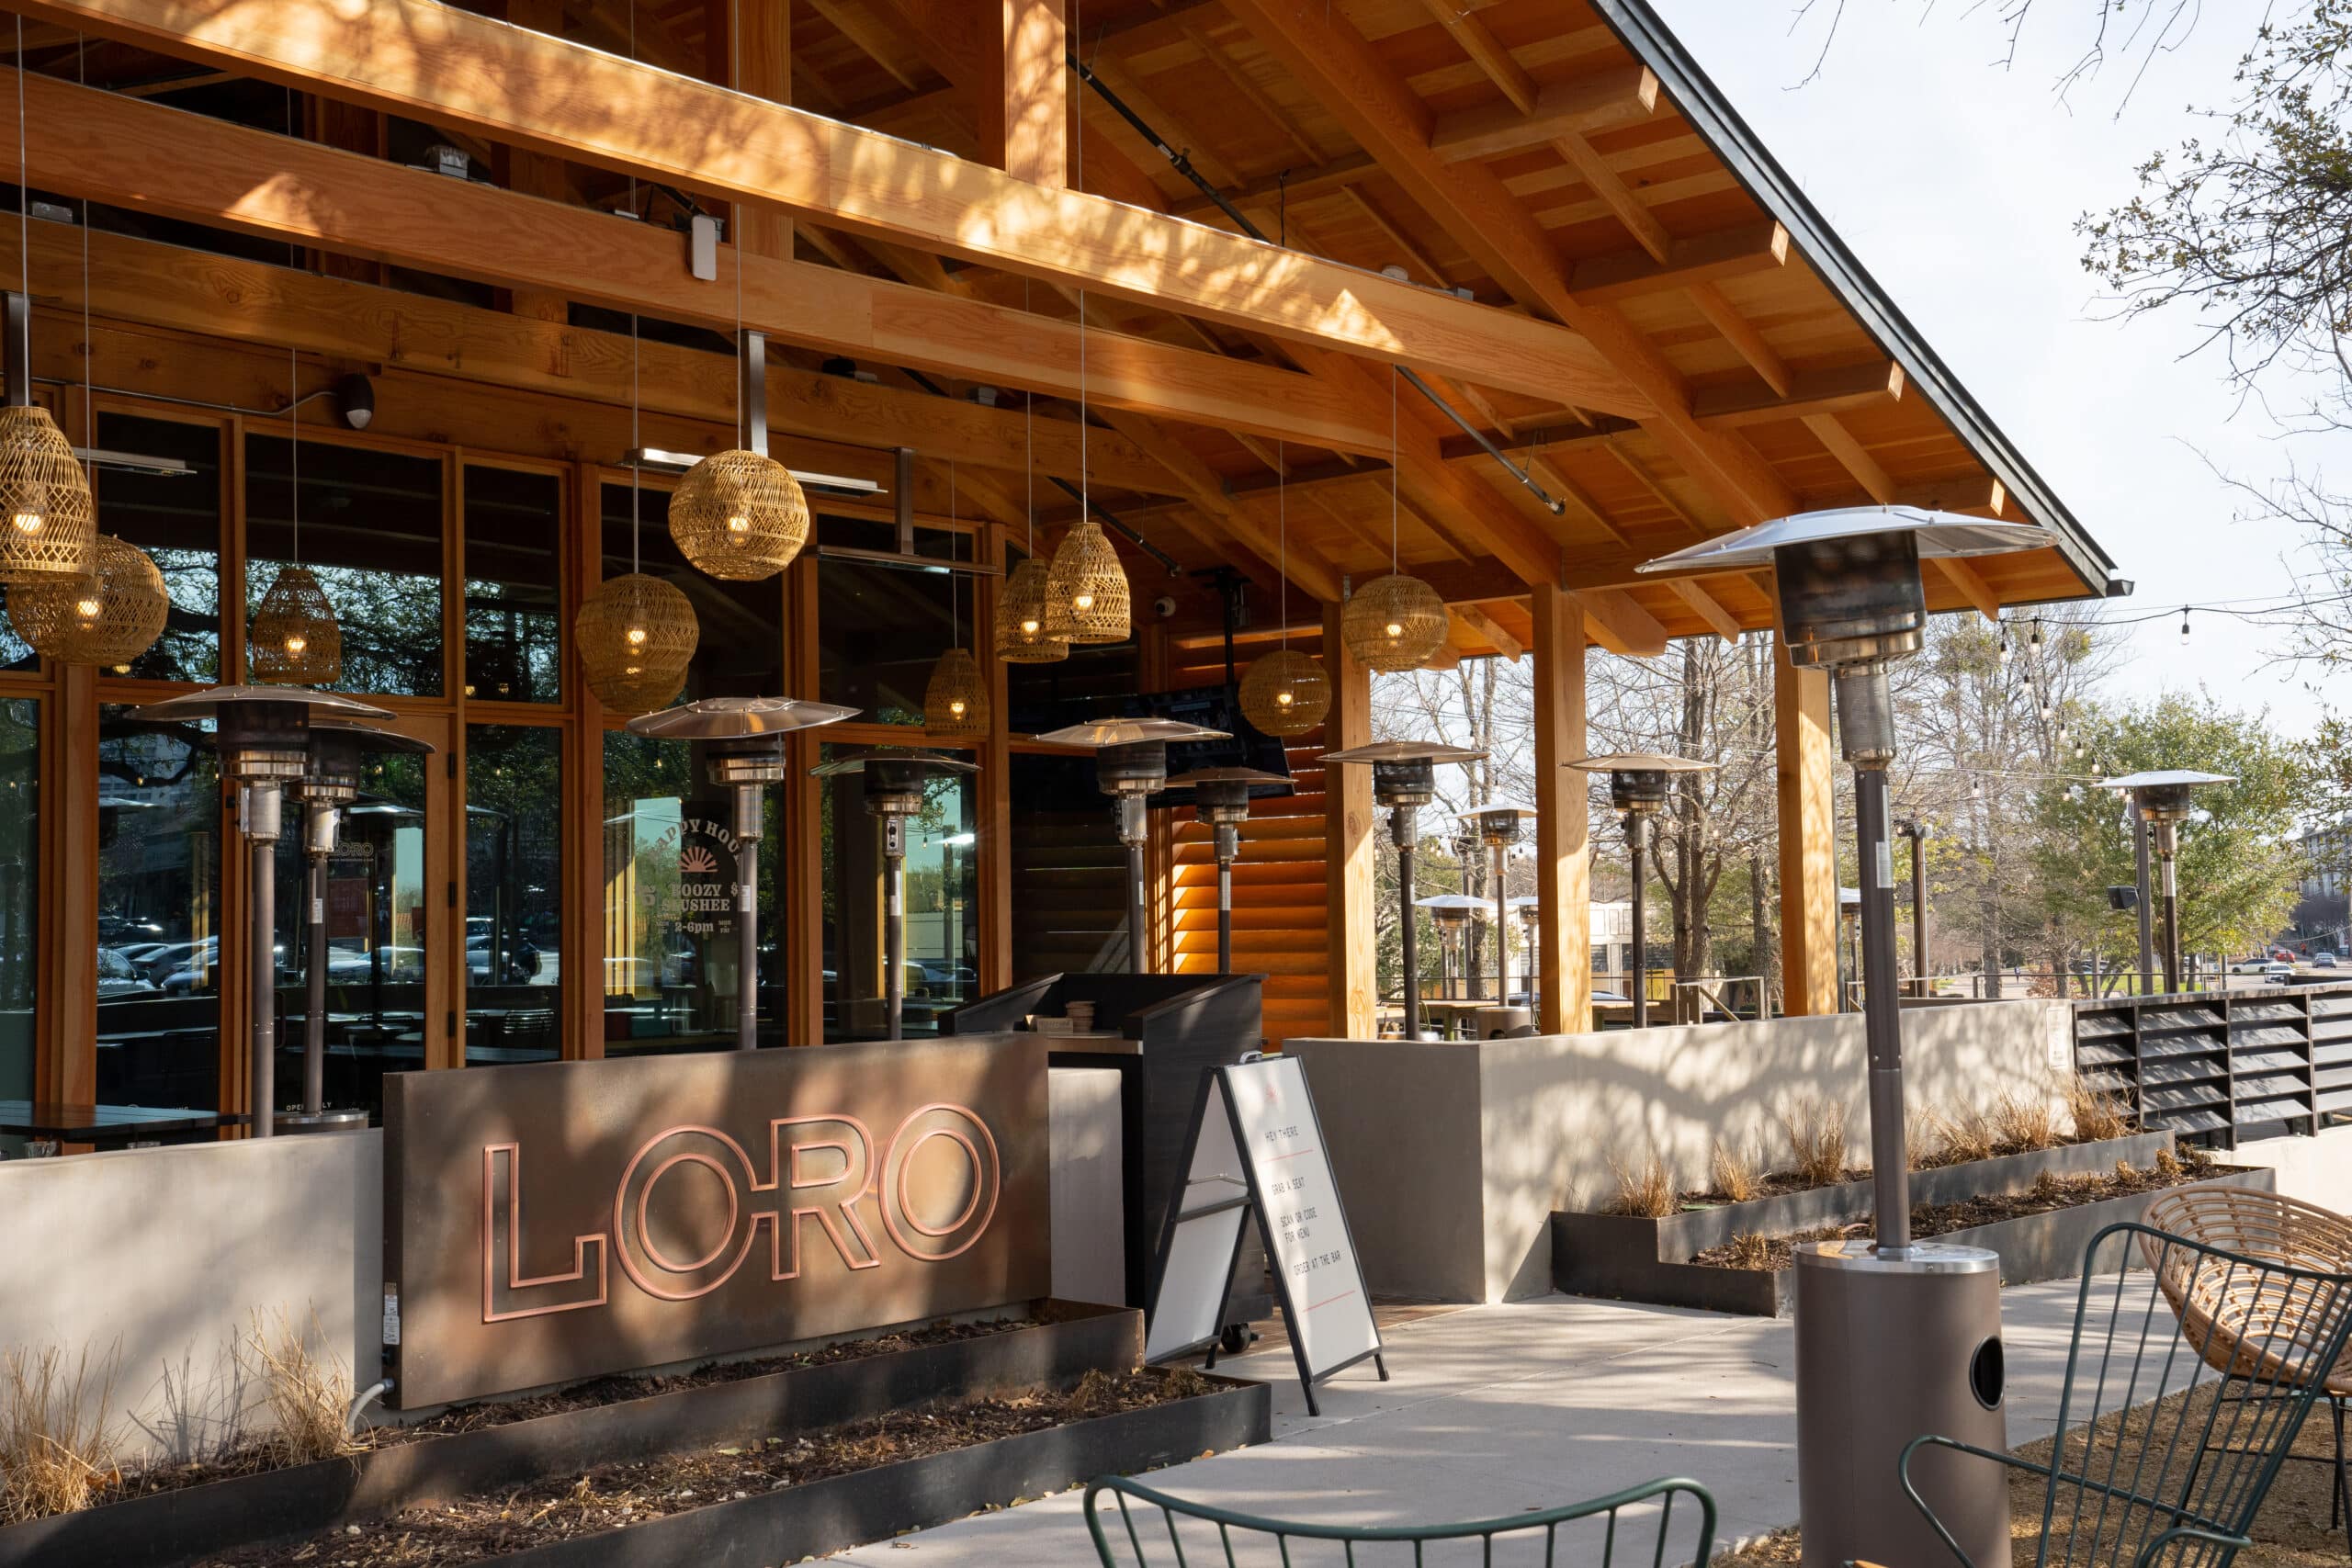 The exterior, sign, and outdoor patios of Loro Addison.